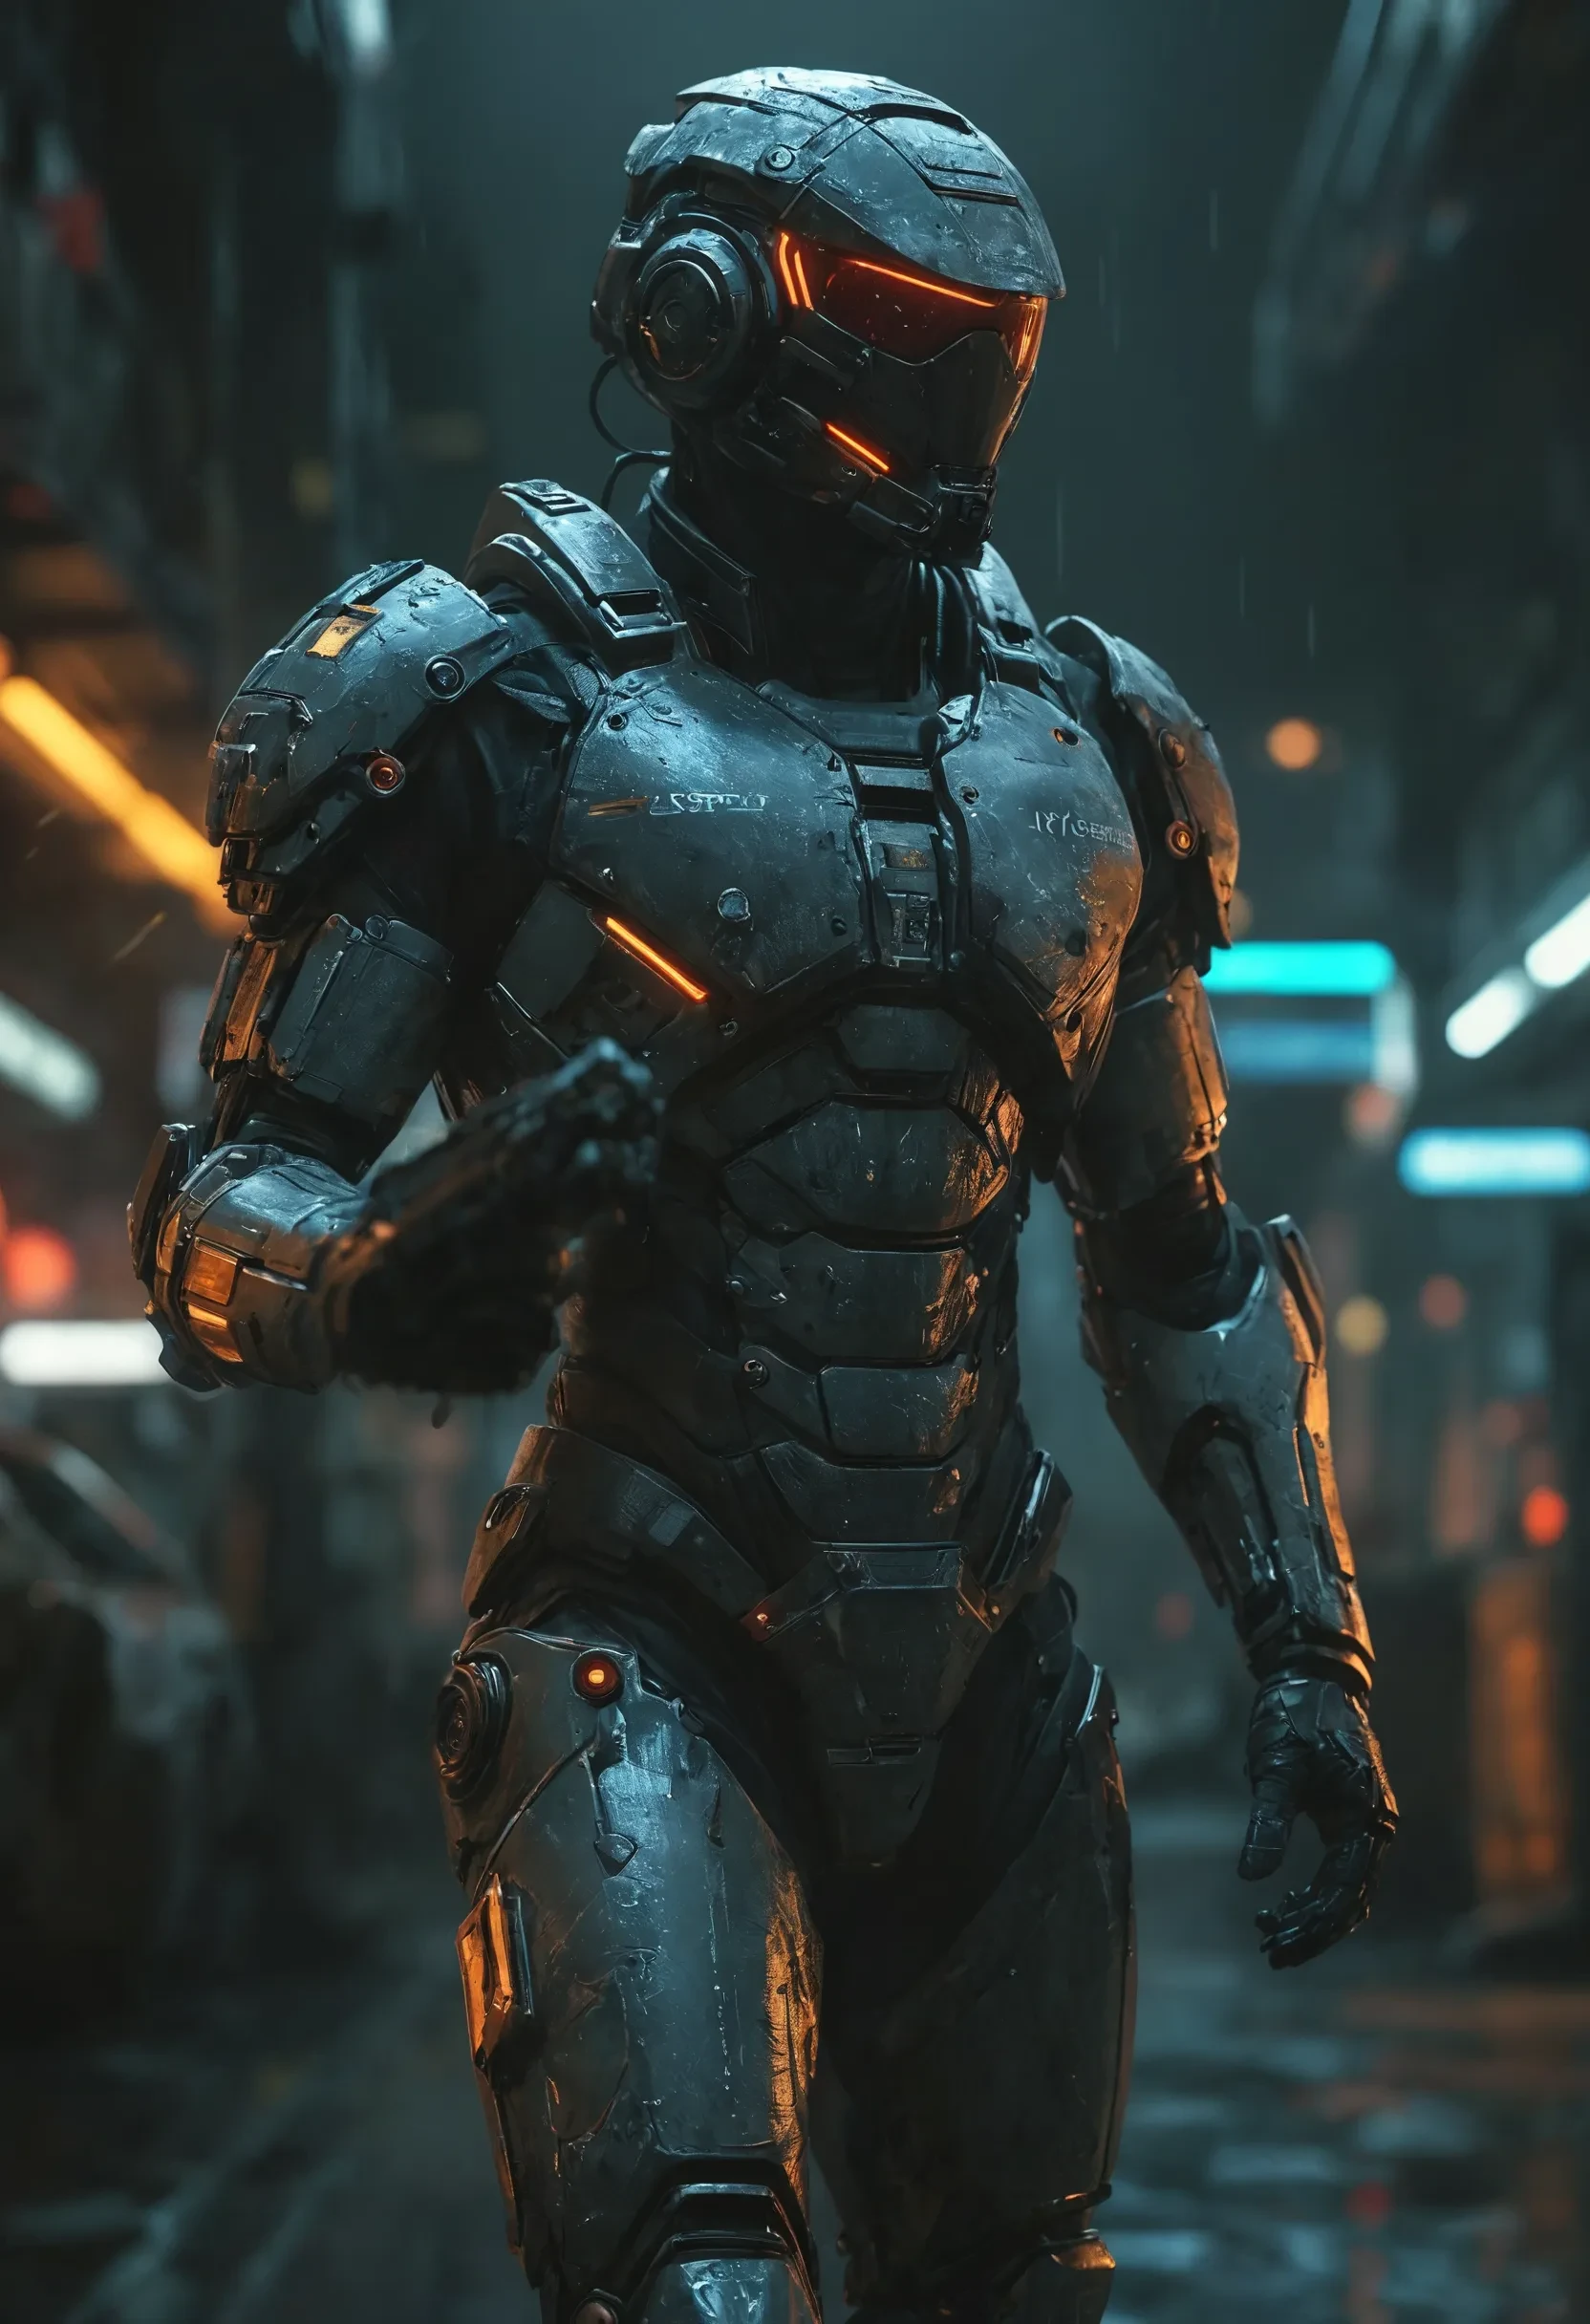 An illustration of a futuristic soldier clad in advanced sci-fi armor, Neon signals running along the rim of the armor,striding confidently while carrying a gun. High-resolution digital illustration capturing the intricate details of the sci-fi armor and advanced weaponry. Format: 4K UHD image. vntblk, dark, background